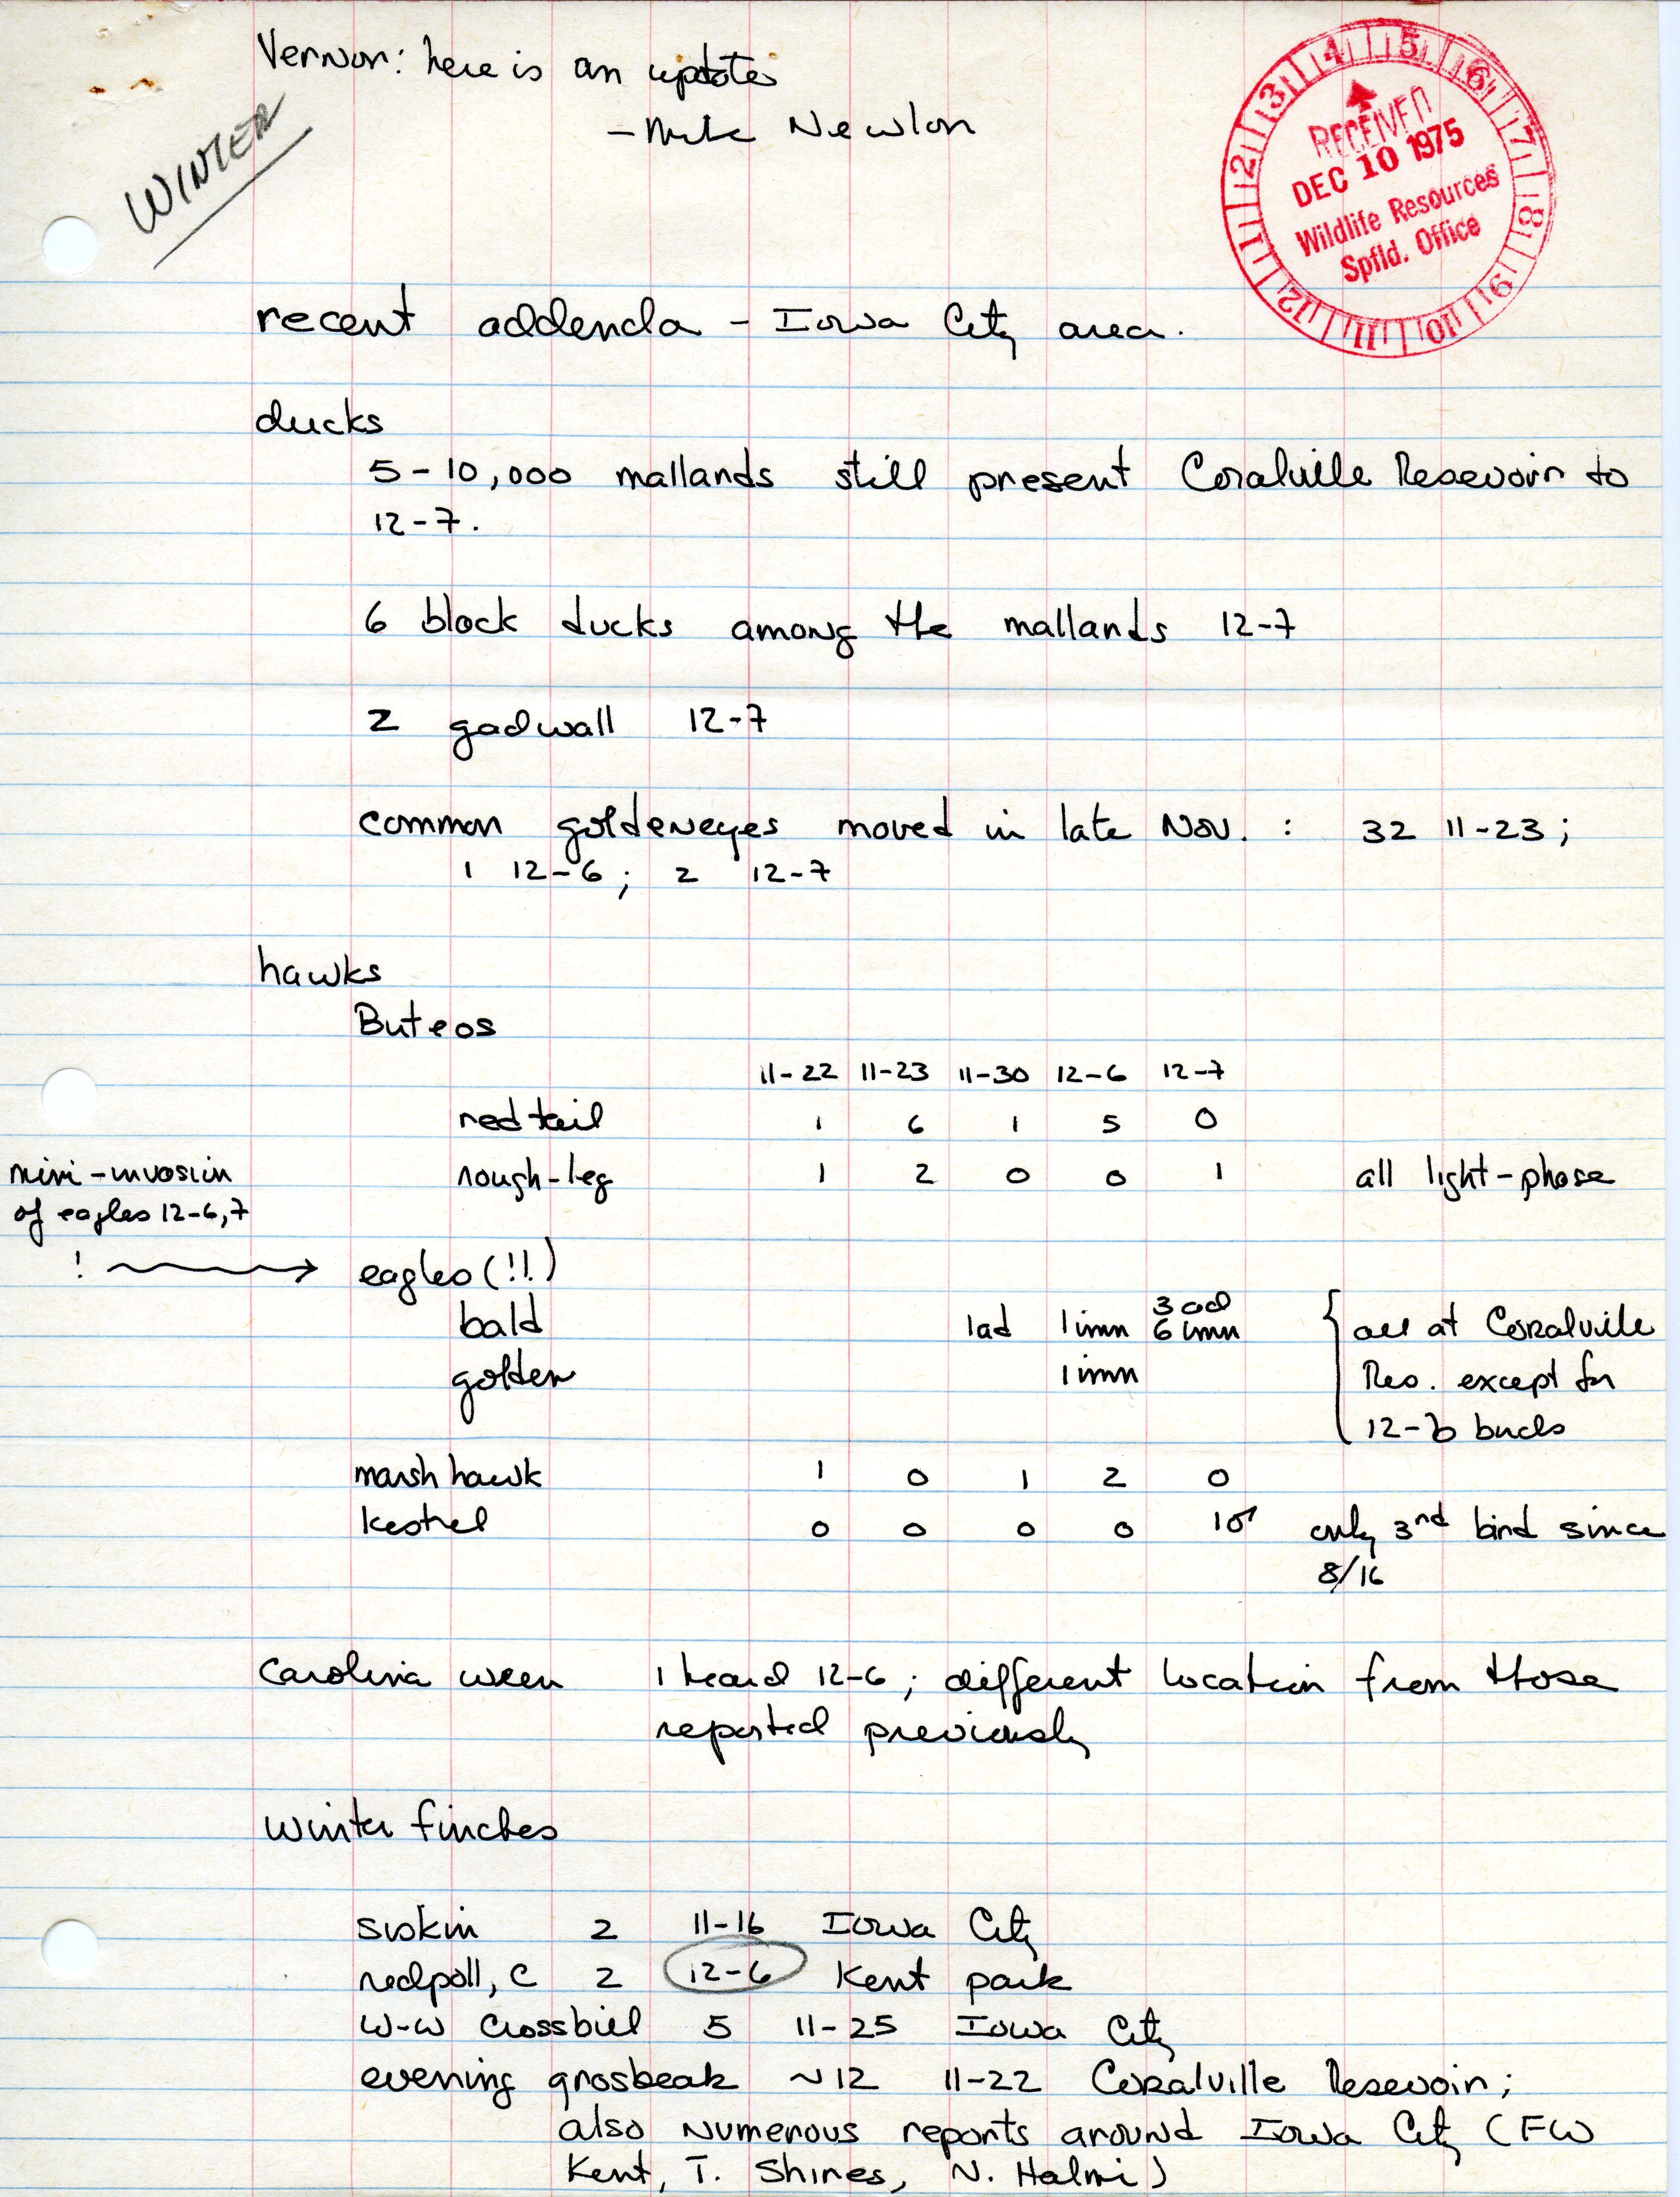 Notes for additional birds observed in the Iowa City area, winter 1975